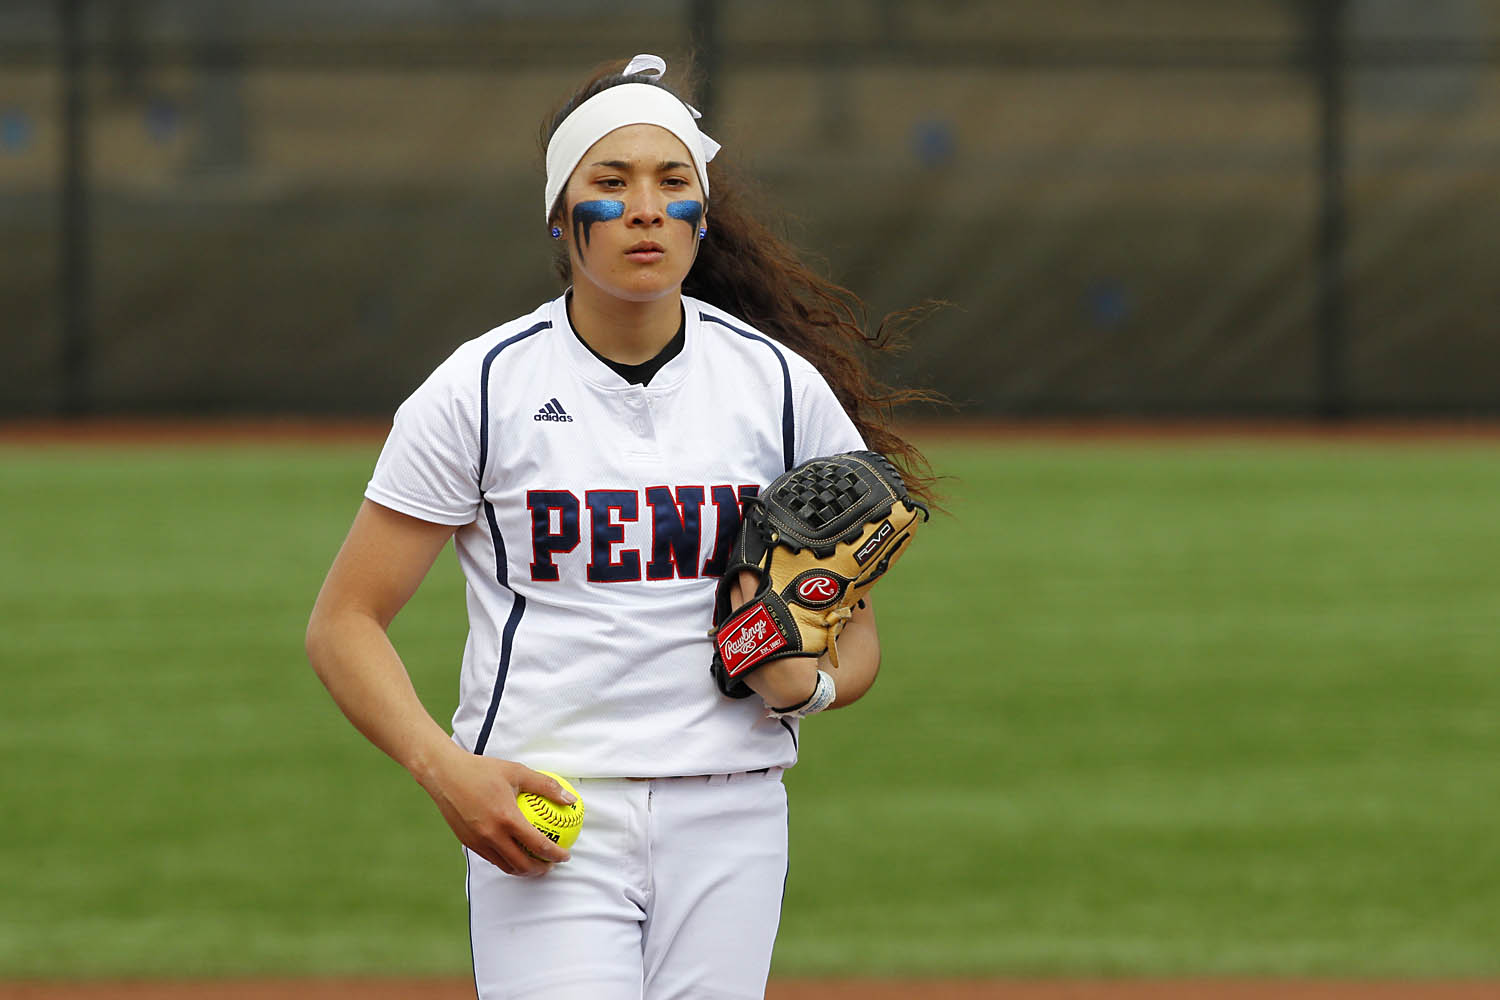 Alexis Borden stands on the mound during her Penn days, looking toward the batter.